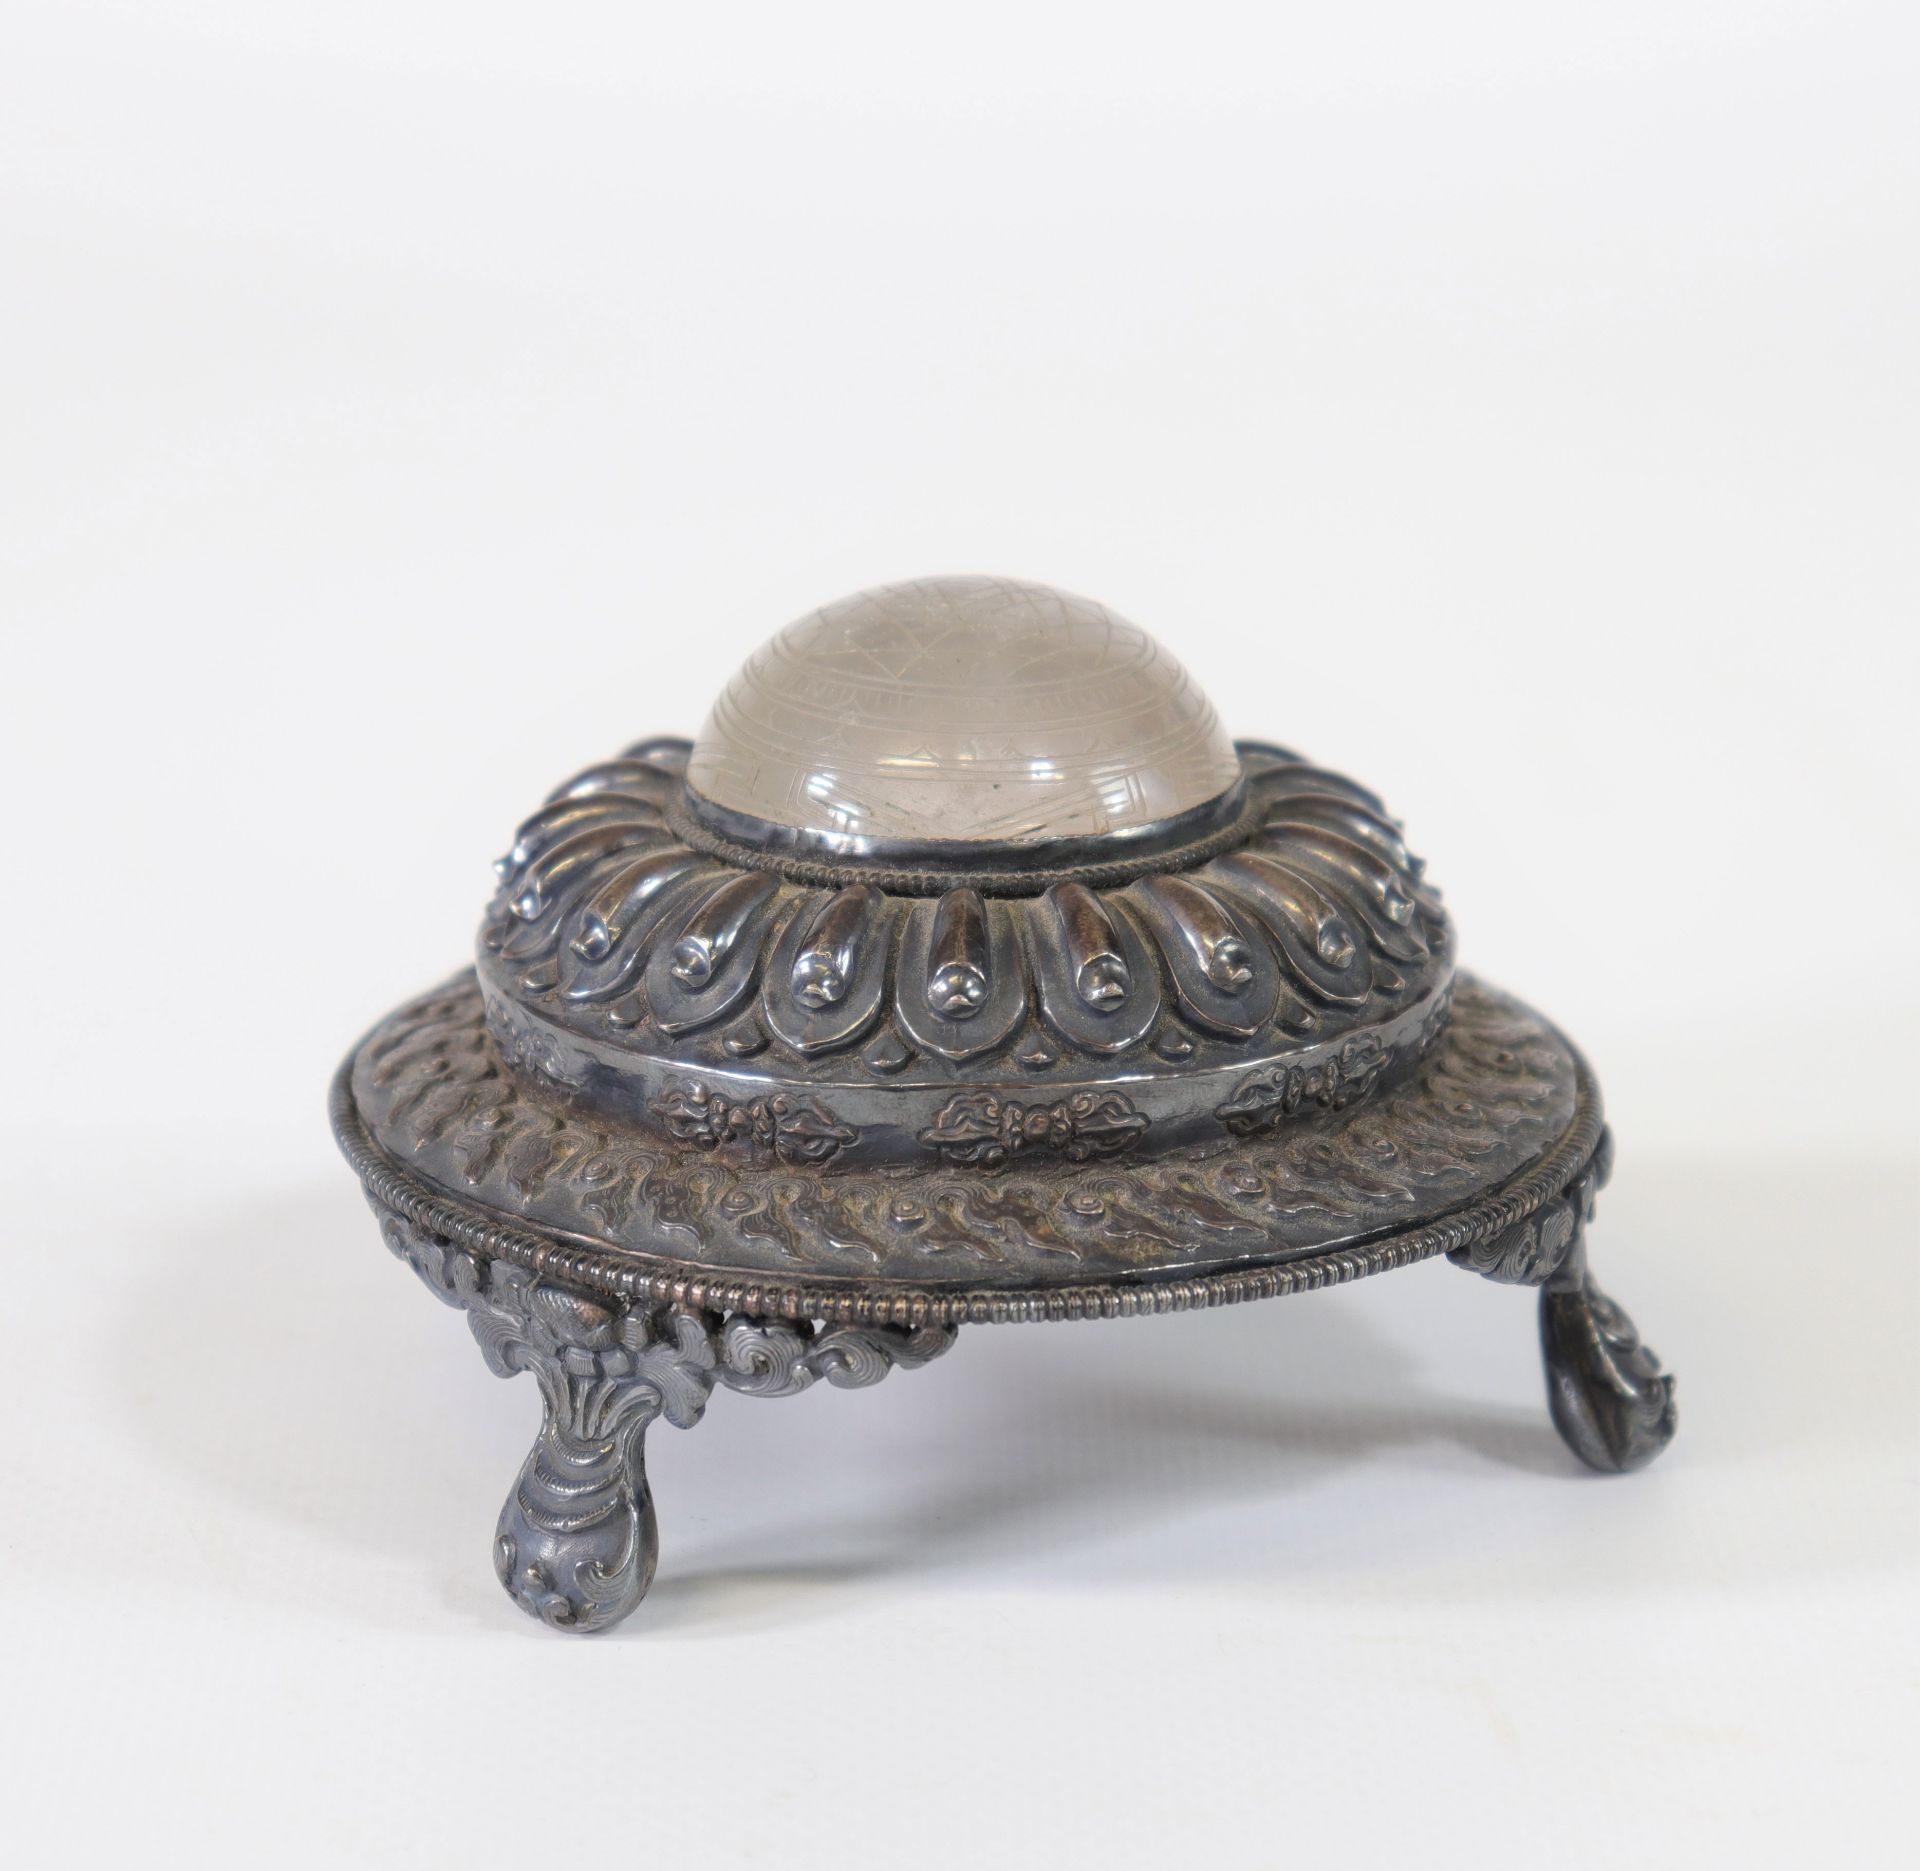 China, Silver literate object mounted on rock crystal, cut - Image 2 of 8